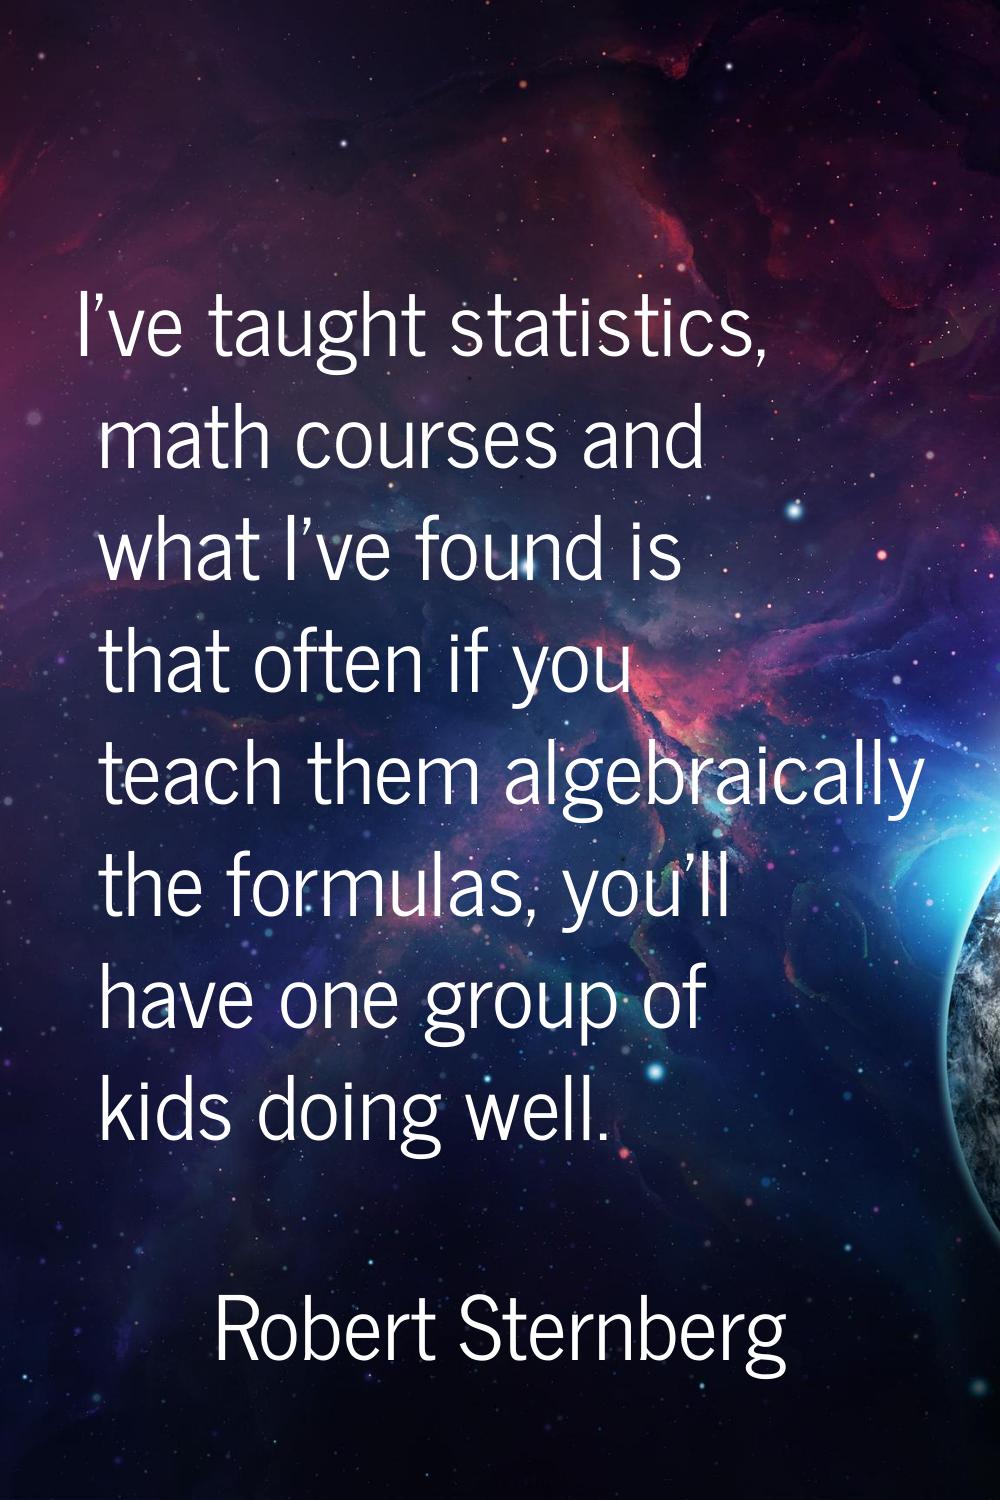 I've taught statistics, math courses and what I've found is that often if you teach them algebraica